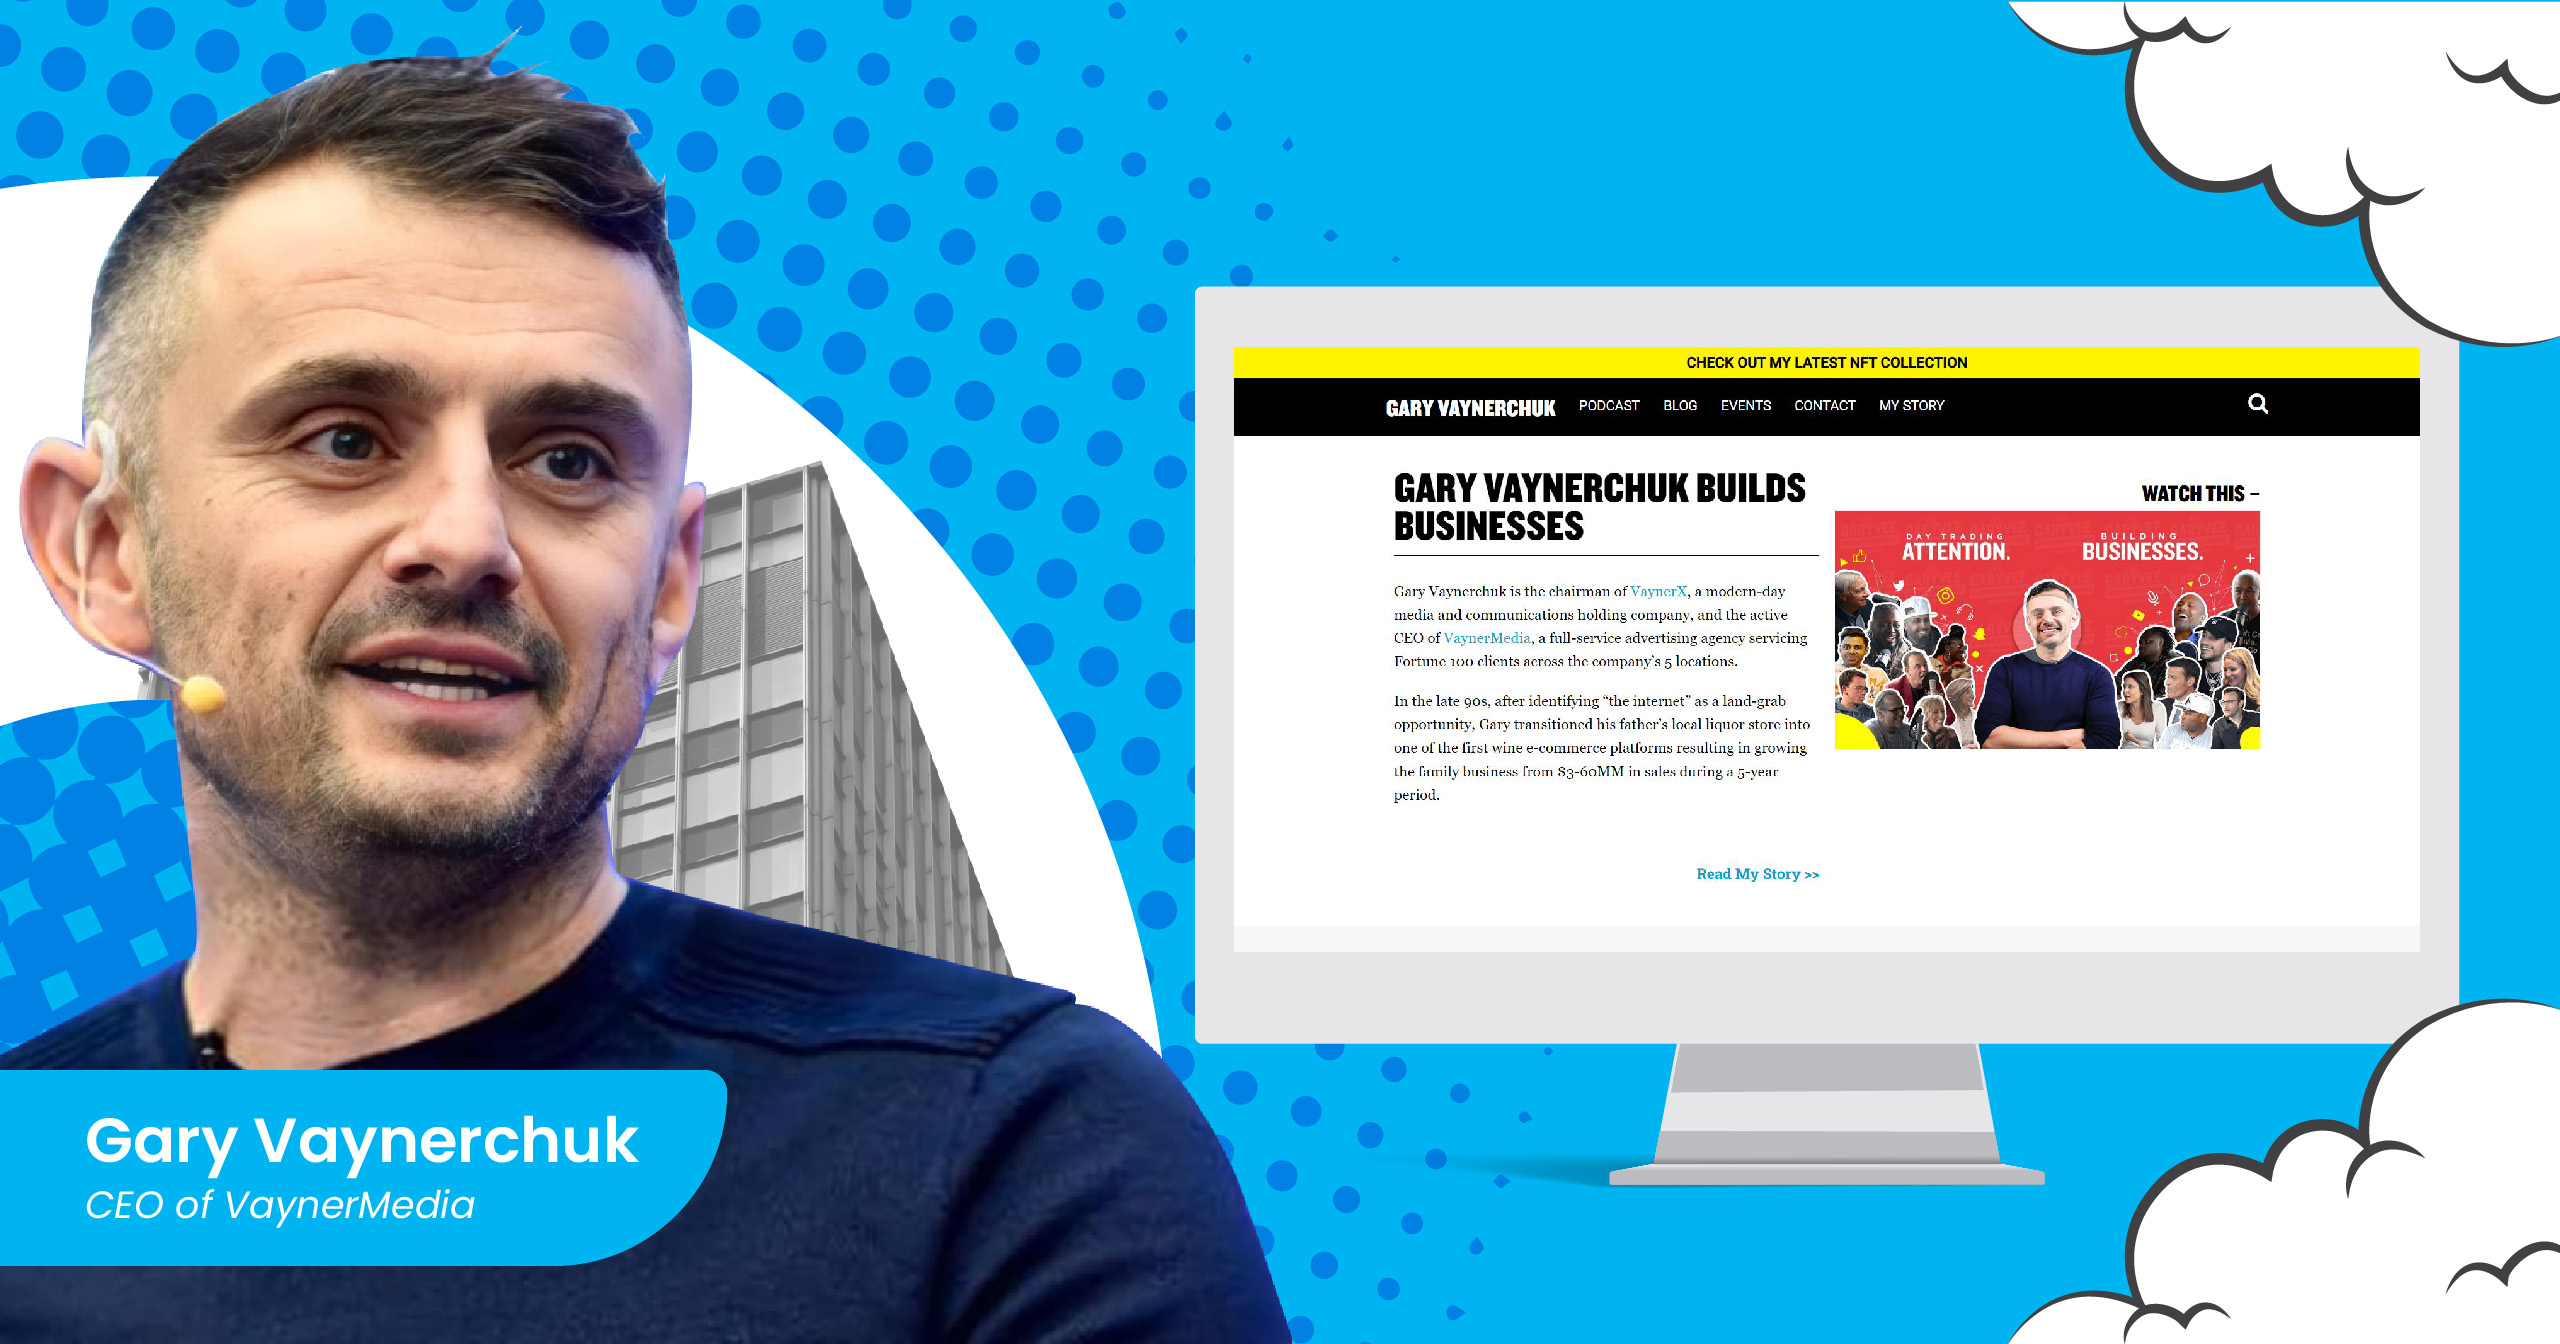 How Gary Vee is One of the Few Omnipresent Gurus Worth Listening To